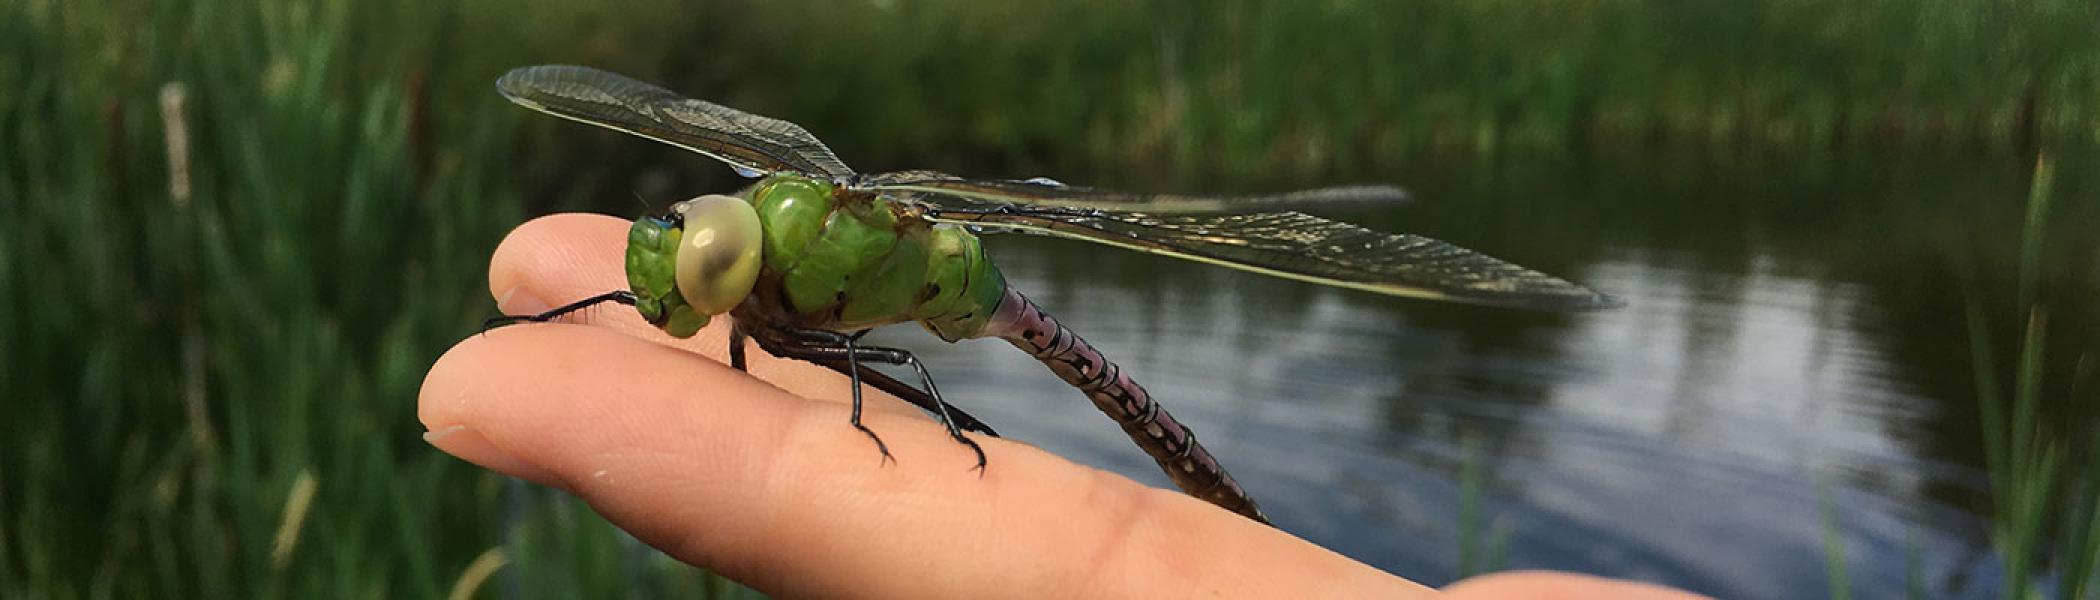 Dragonfly on someone's finger